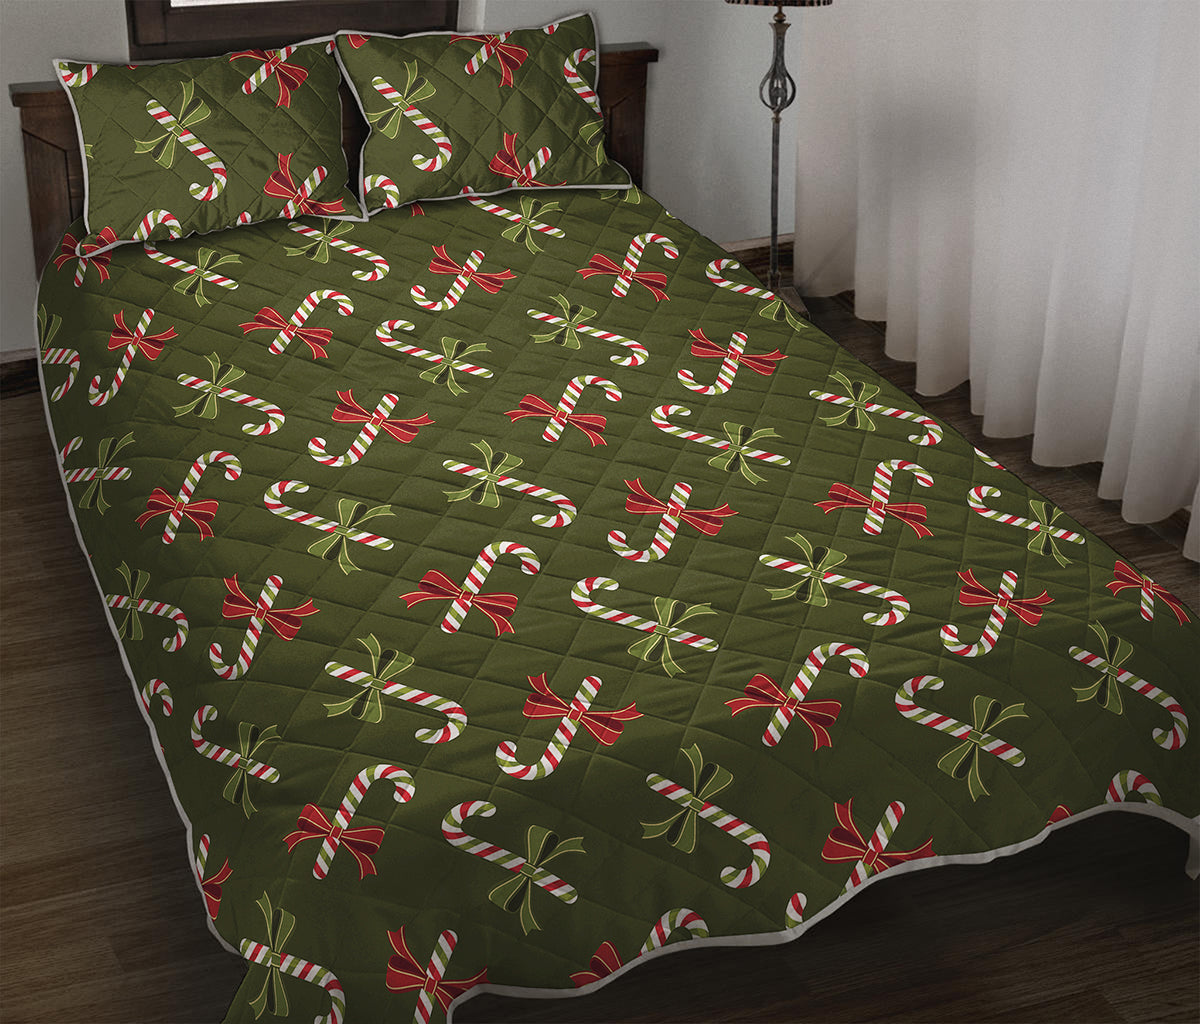 Xmas Candy Cane Pattern Print Quilt Bed Set